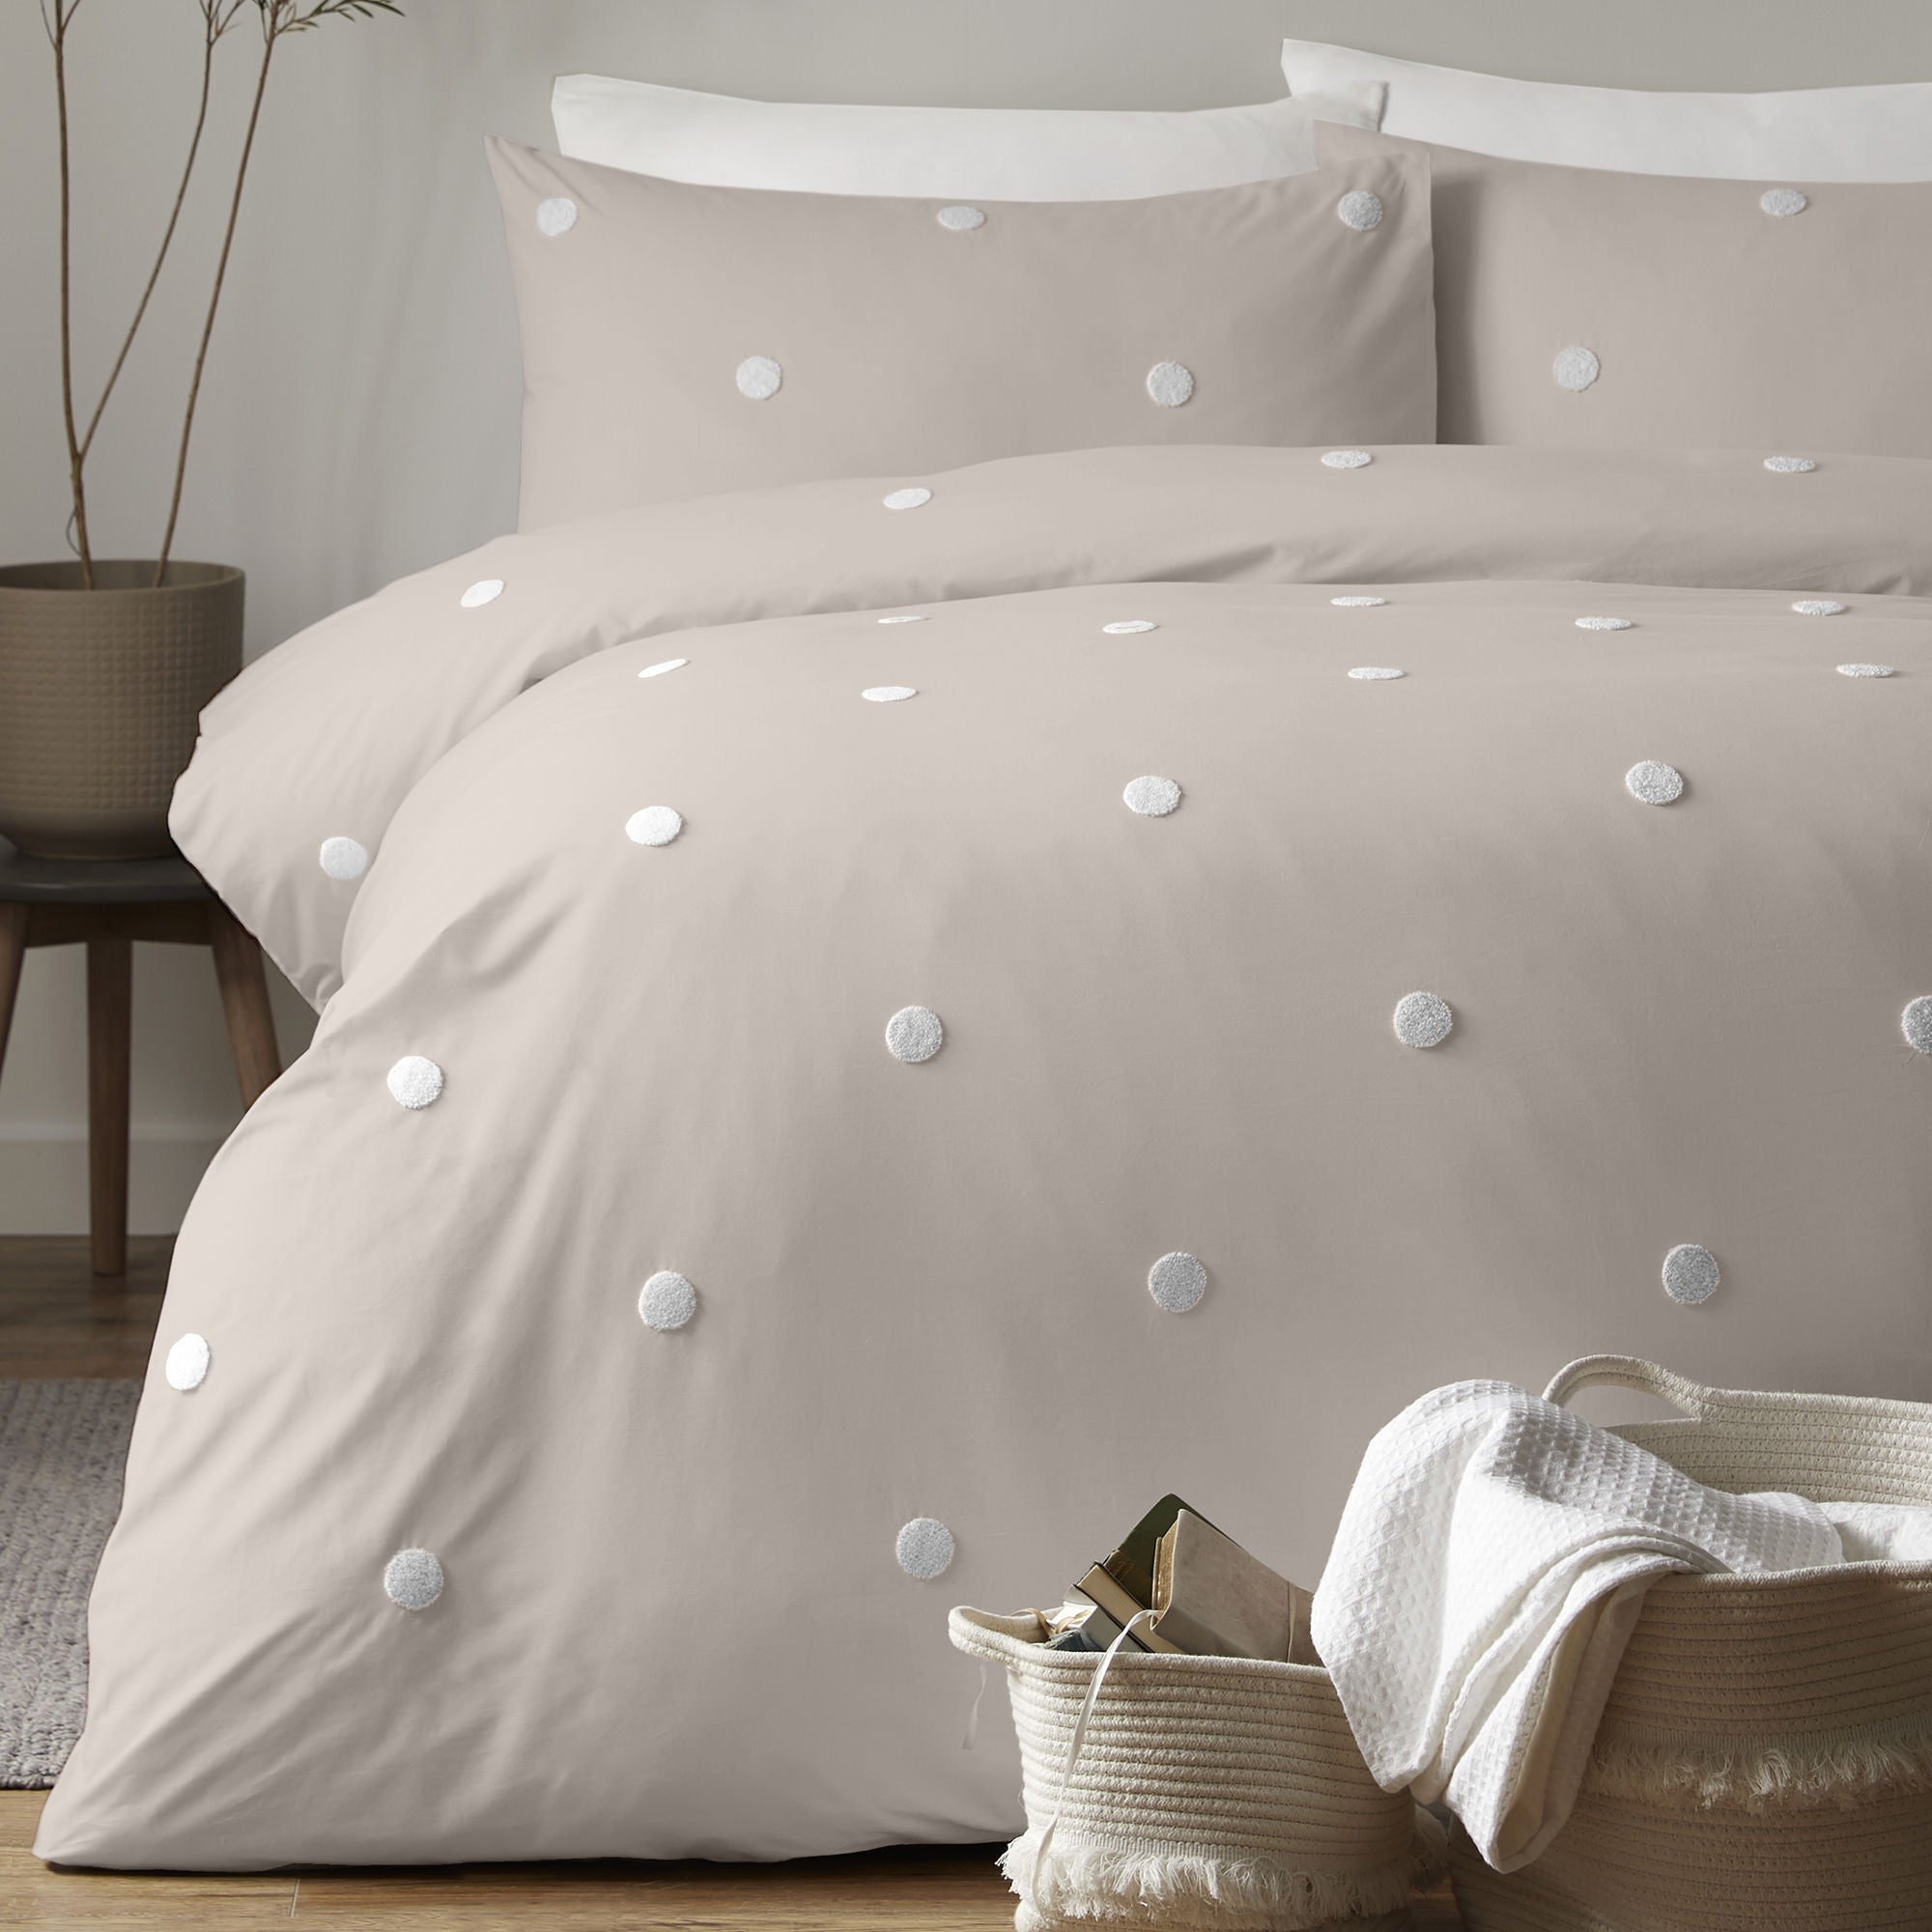 Dot Garden Duvet Cover Set by Appletree Boutique in White with Pink Dots - Duvet Cover Set - Appletree Boutique